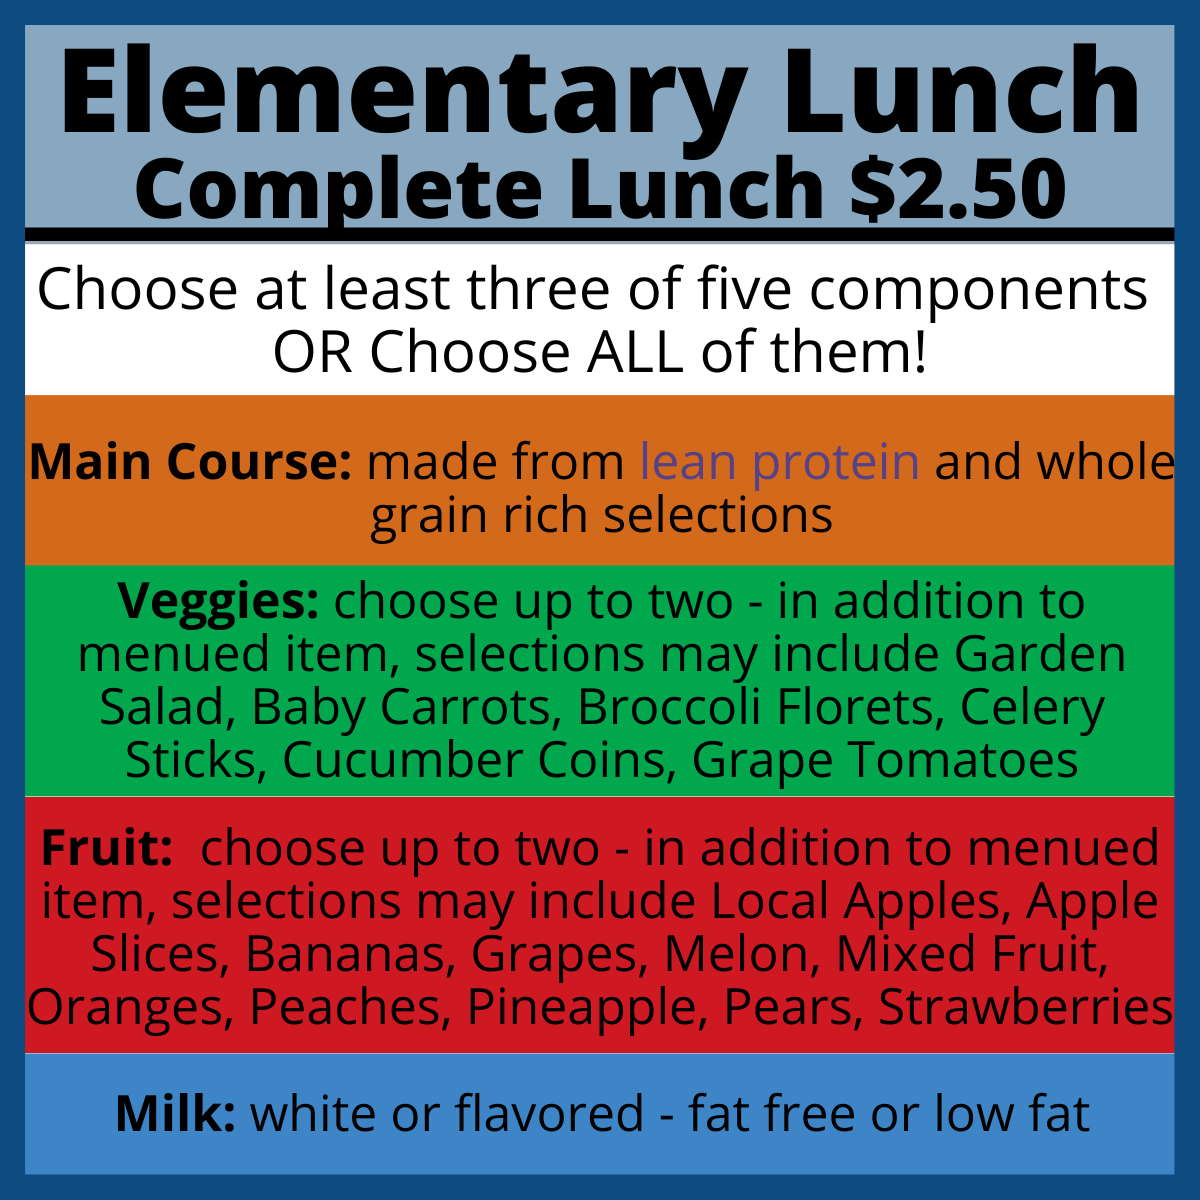 Click to open Elementary Complete Lunch description